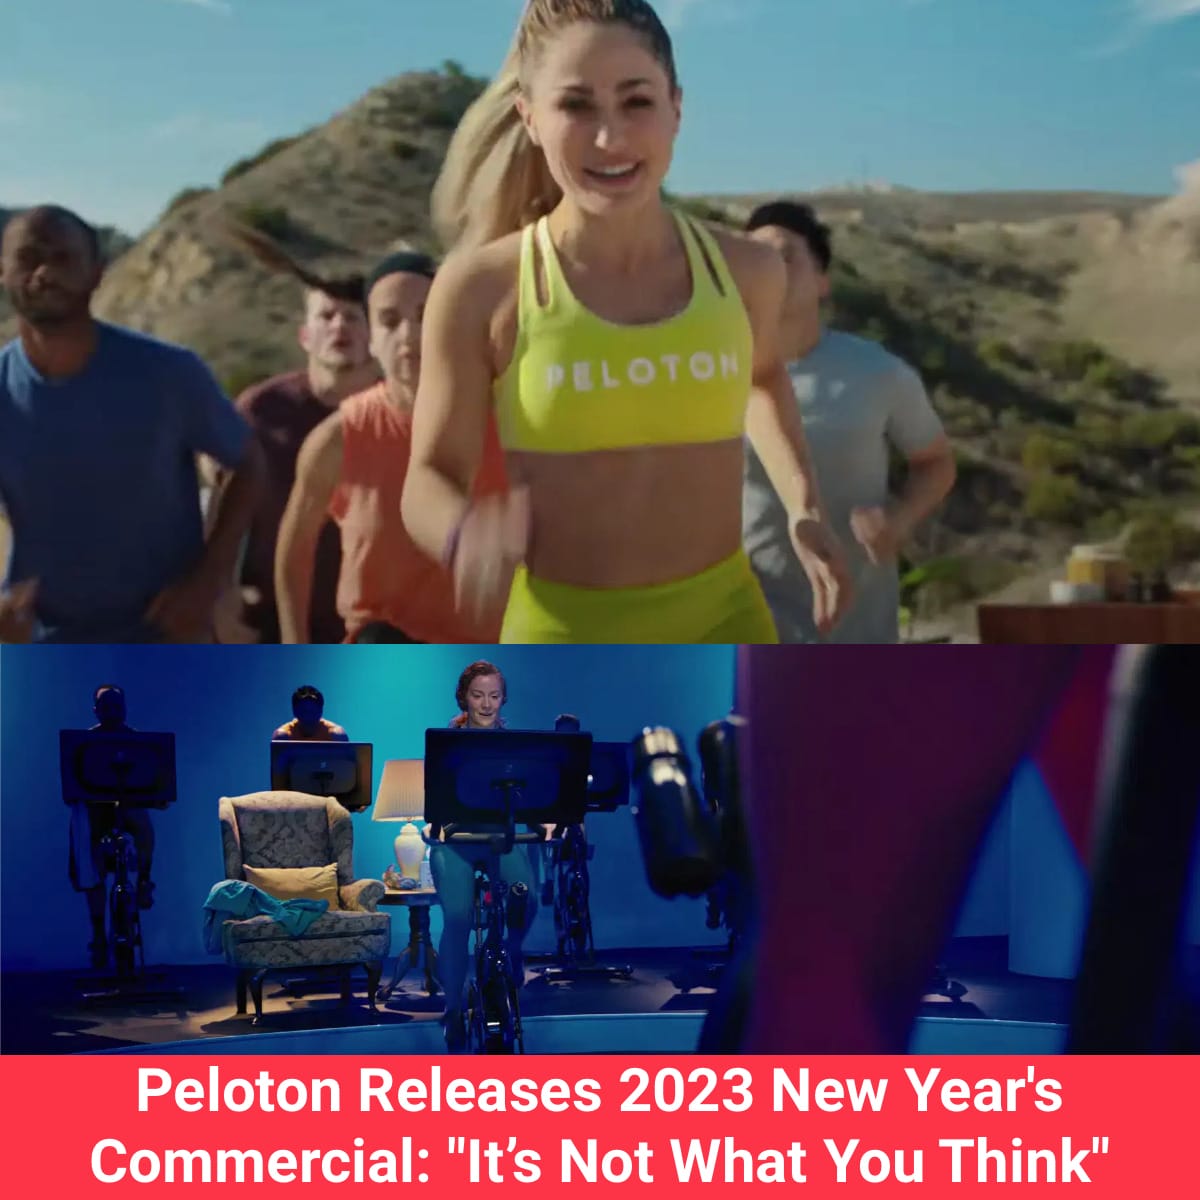 Peloton Releases 2023 New Year's Commercial "It’s Not What You Think